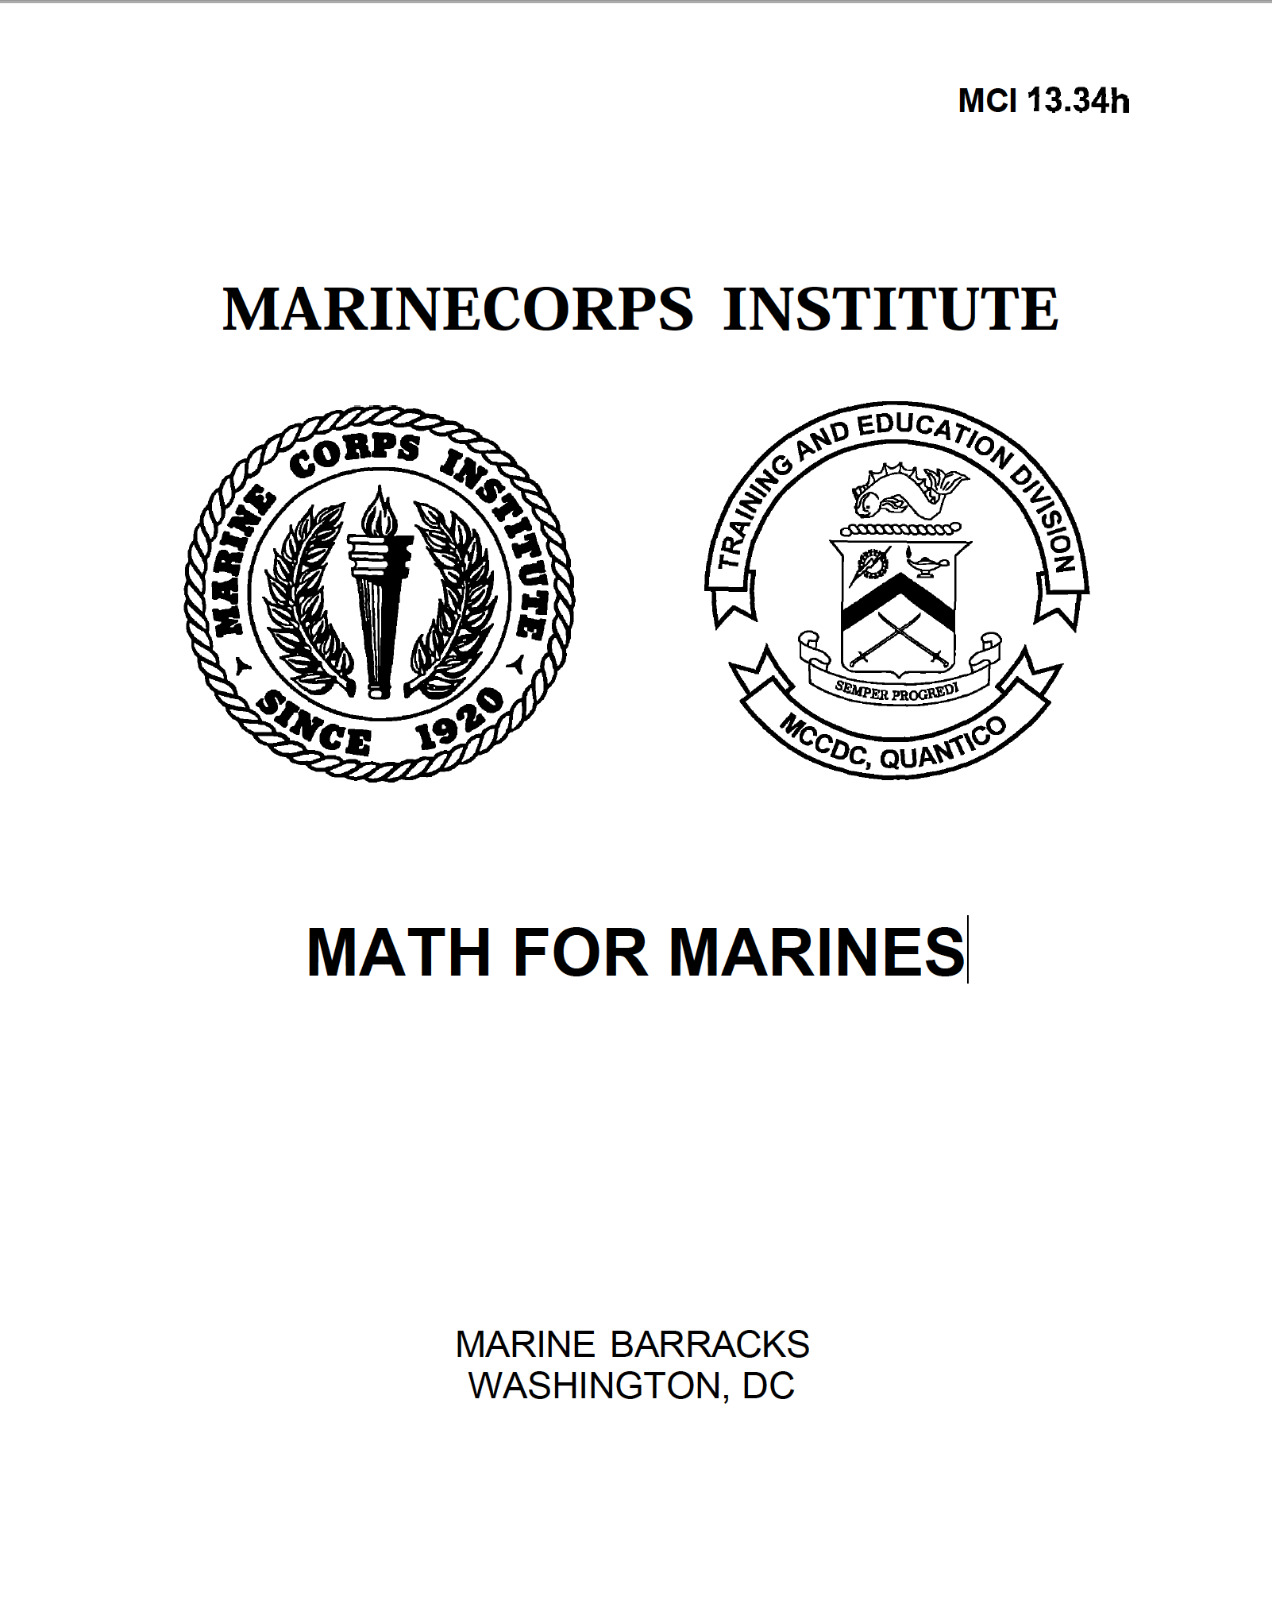 280 Page MARINE CORPS INSTITUTE MATH FOR MARINES Mathematics Manual on CD